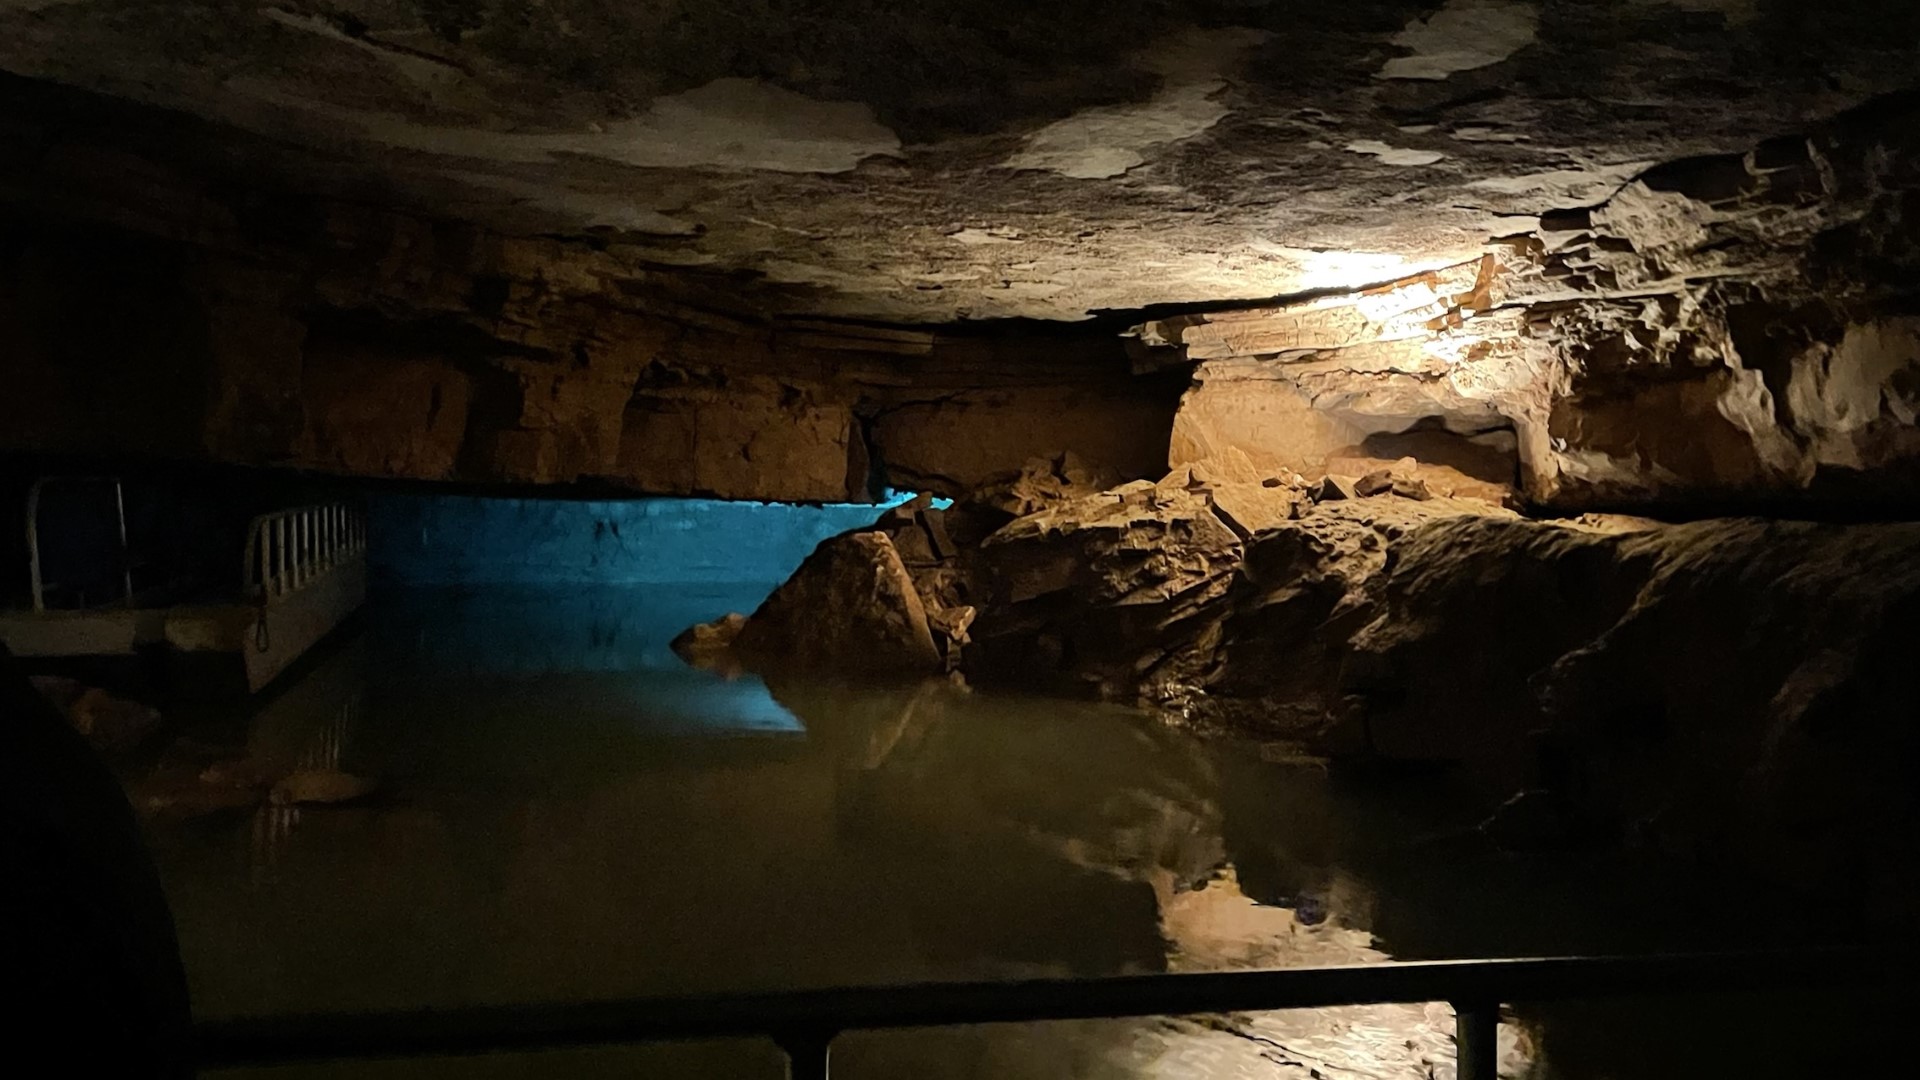 Located in Corydon, Indiana Caverns has a nearly 40-foot tall waterfall and invites visitors on a four-hour underground challenge and family-friendly walking tours.